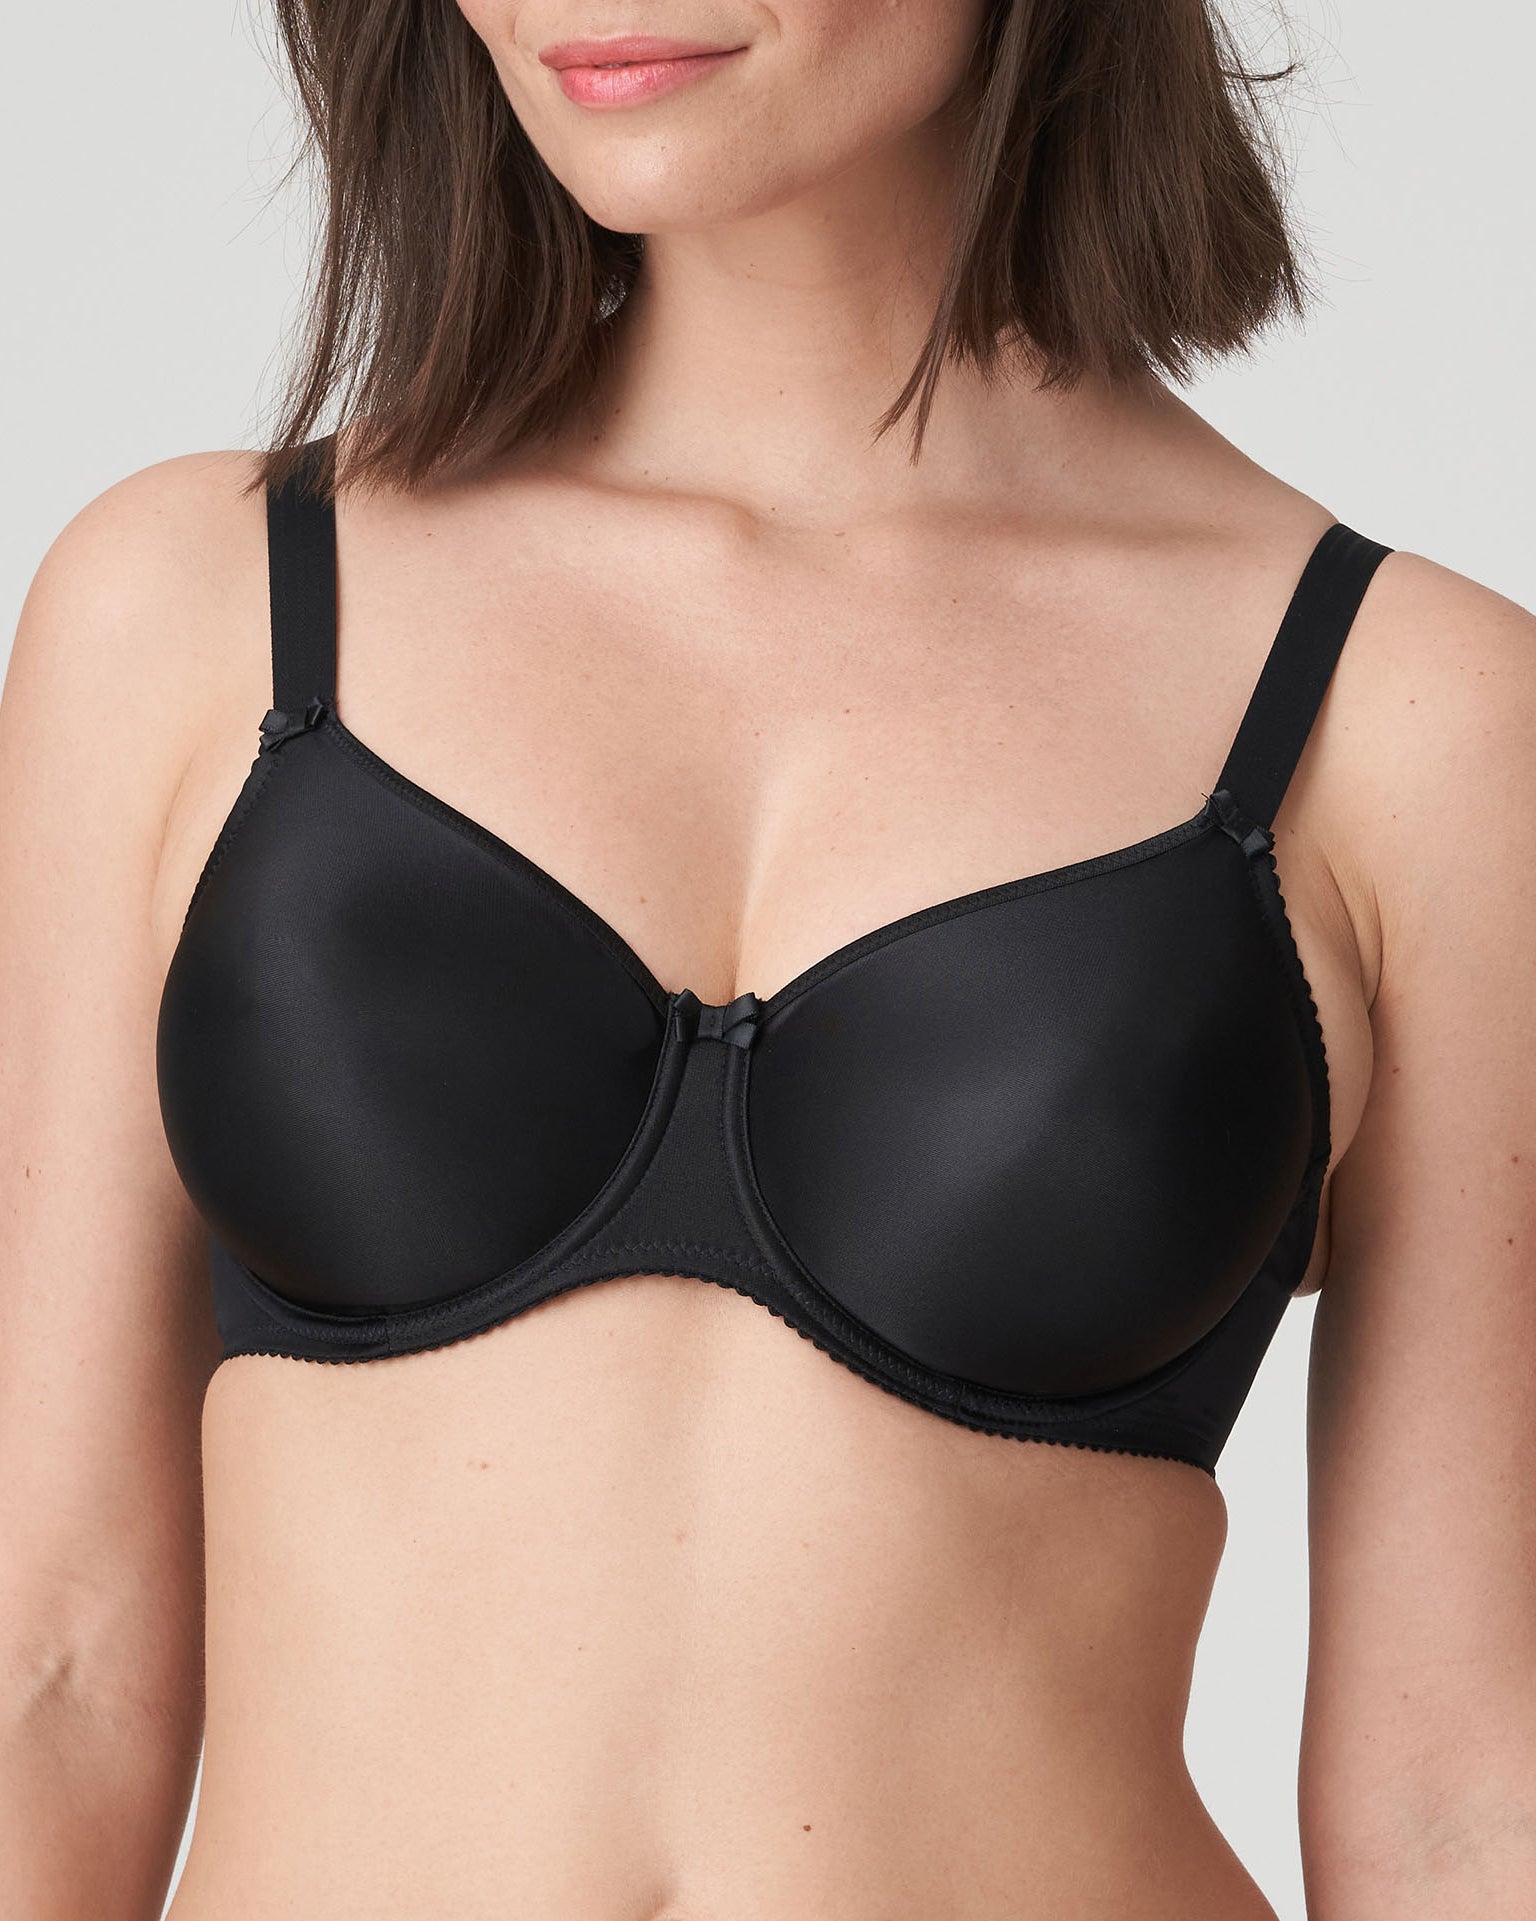 Bras - An Intimate Affaire